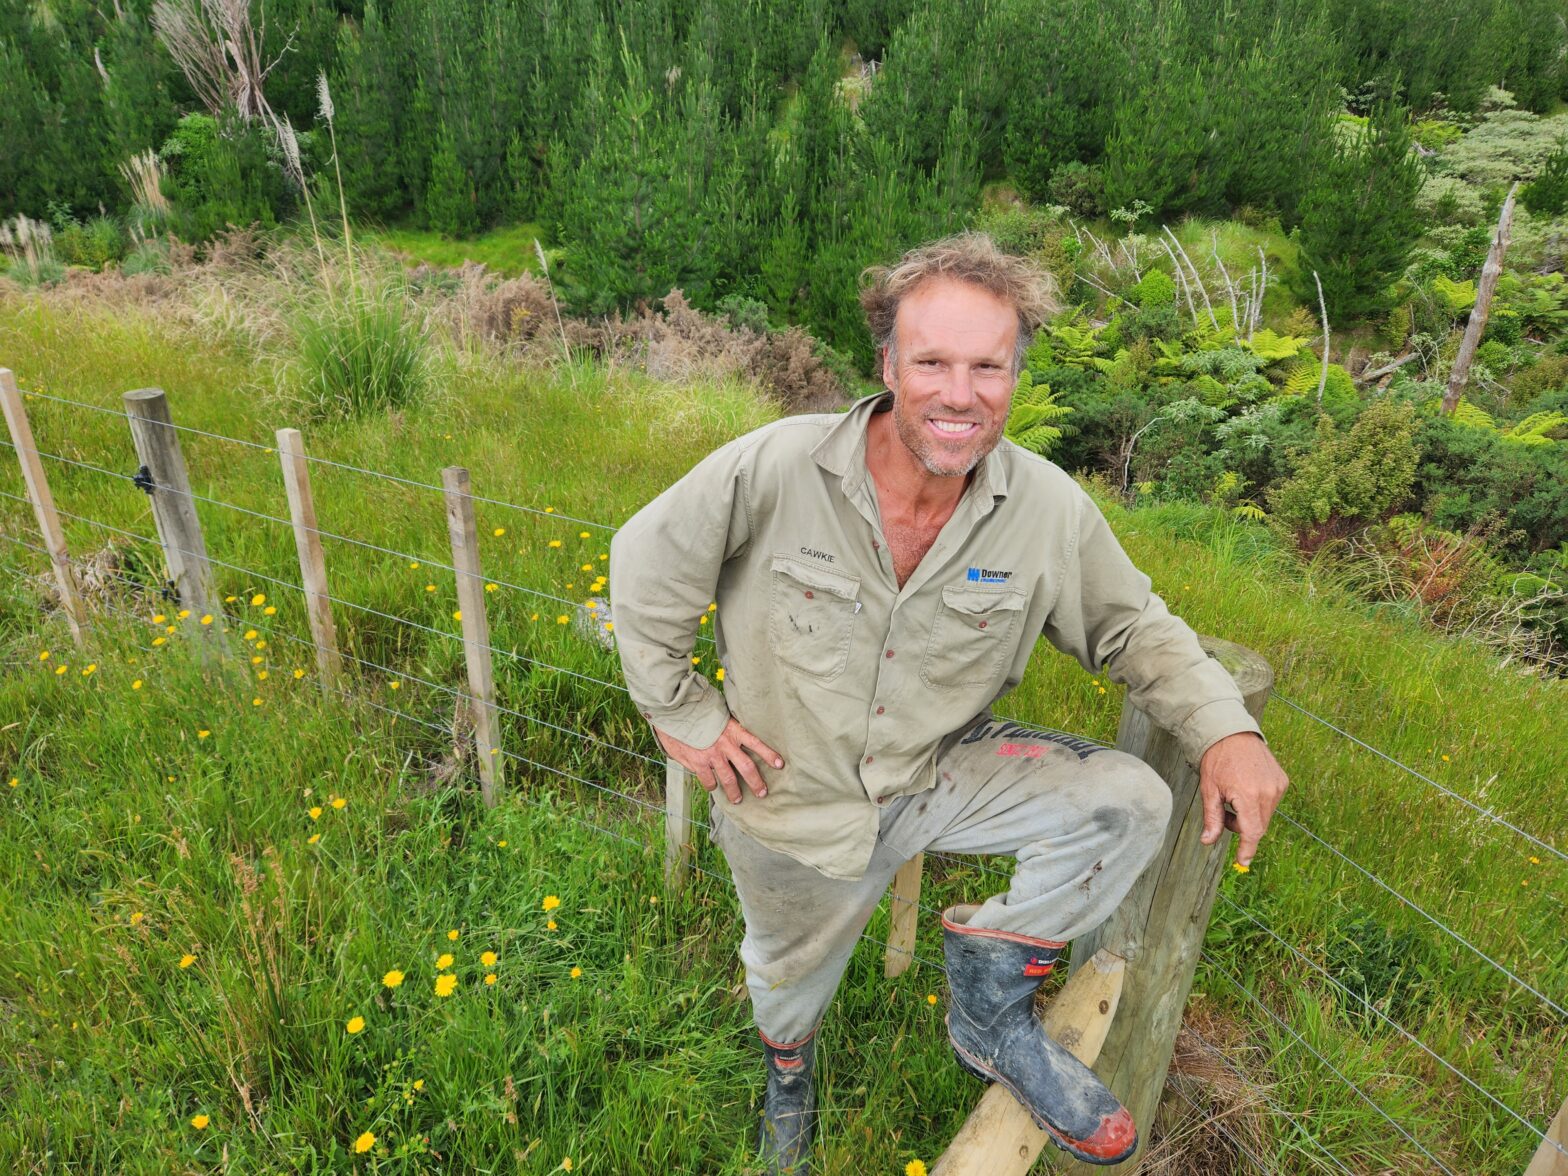 Maungaturoto beef farmer Ian Cawkwell who has teamed up with KMR to fast-track native tree regeneration